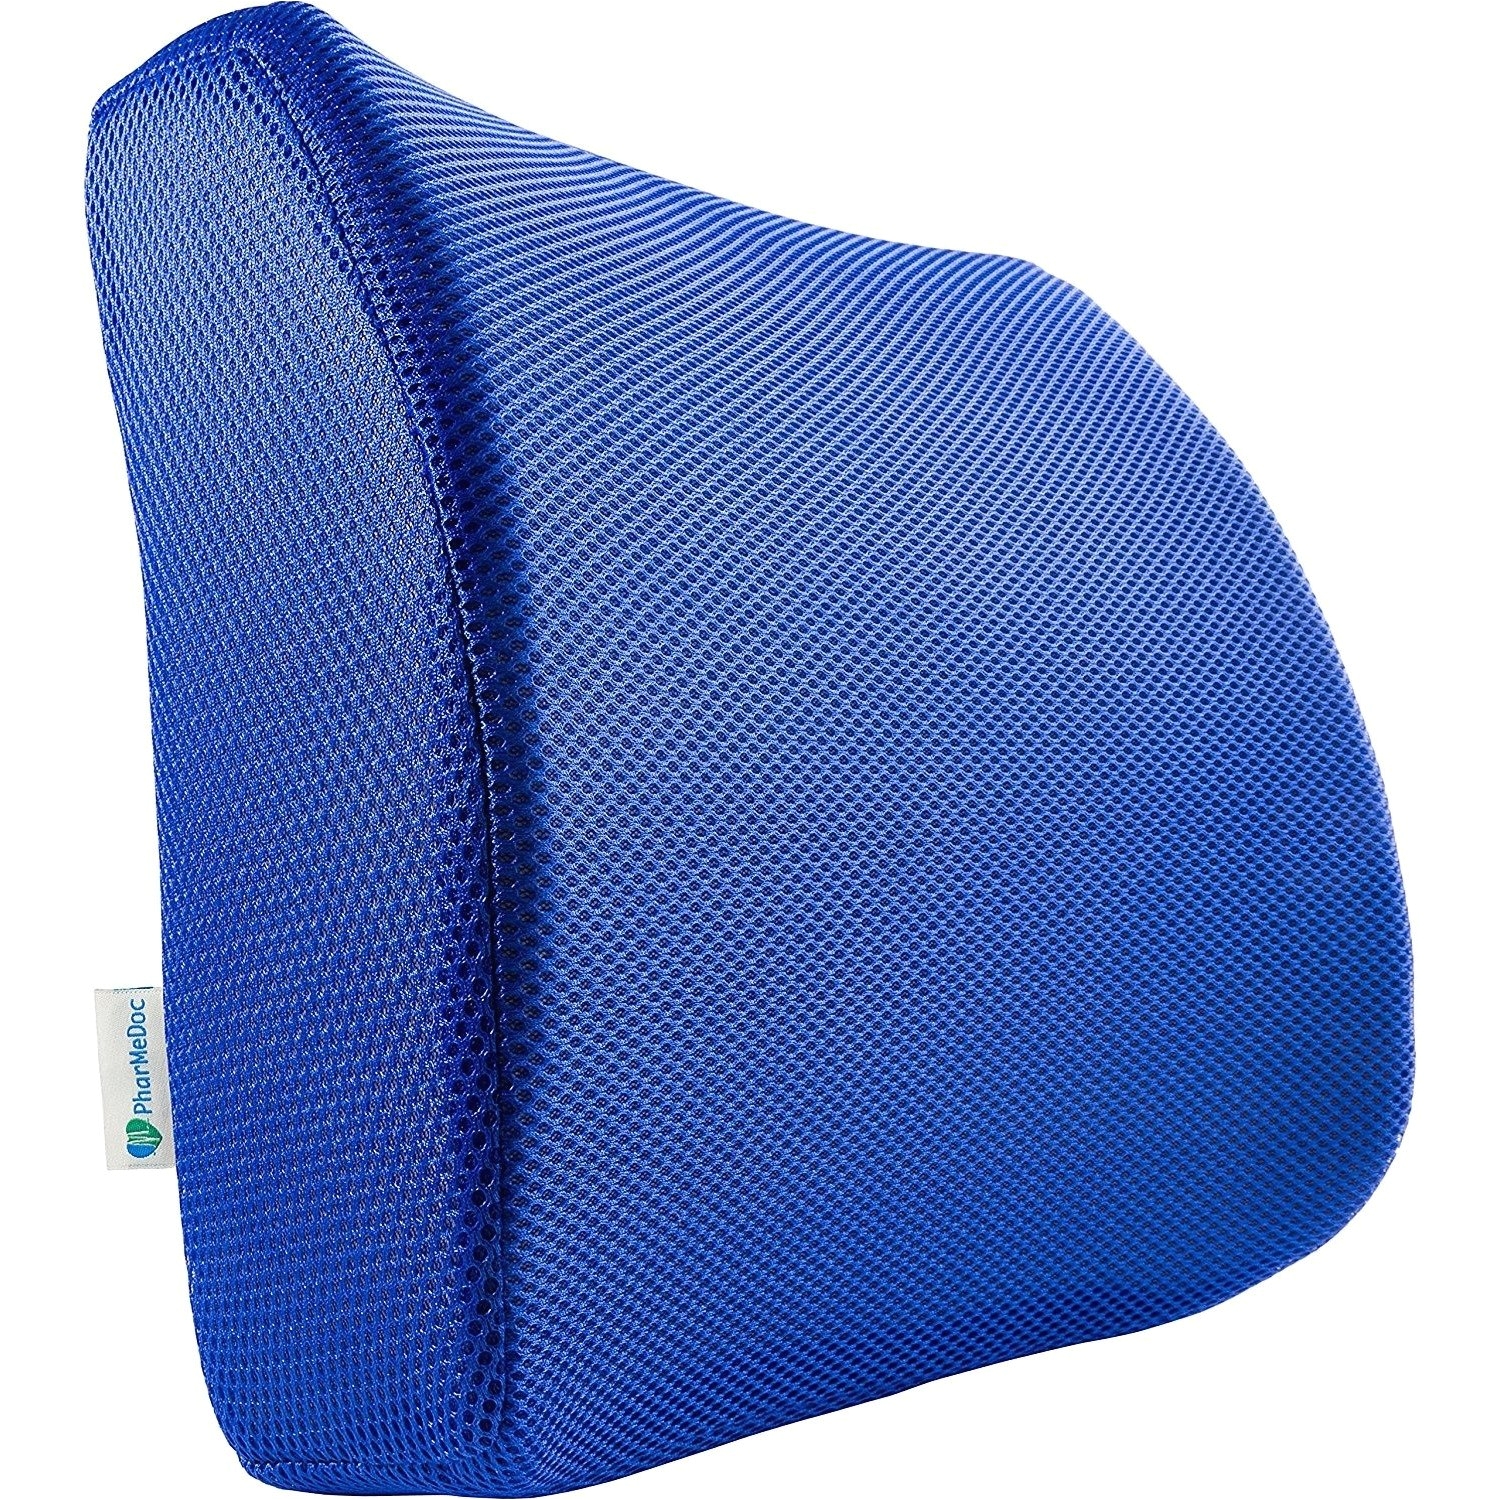 shop pharmedoc lumbar pillow support cushion lower back sciatica and tailbone pain relief orthopedic contour foam wedge on sale free shipping on orders